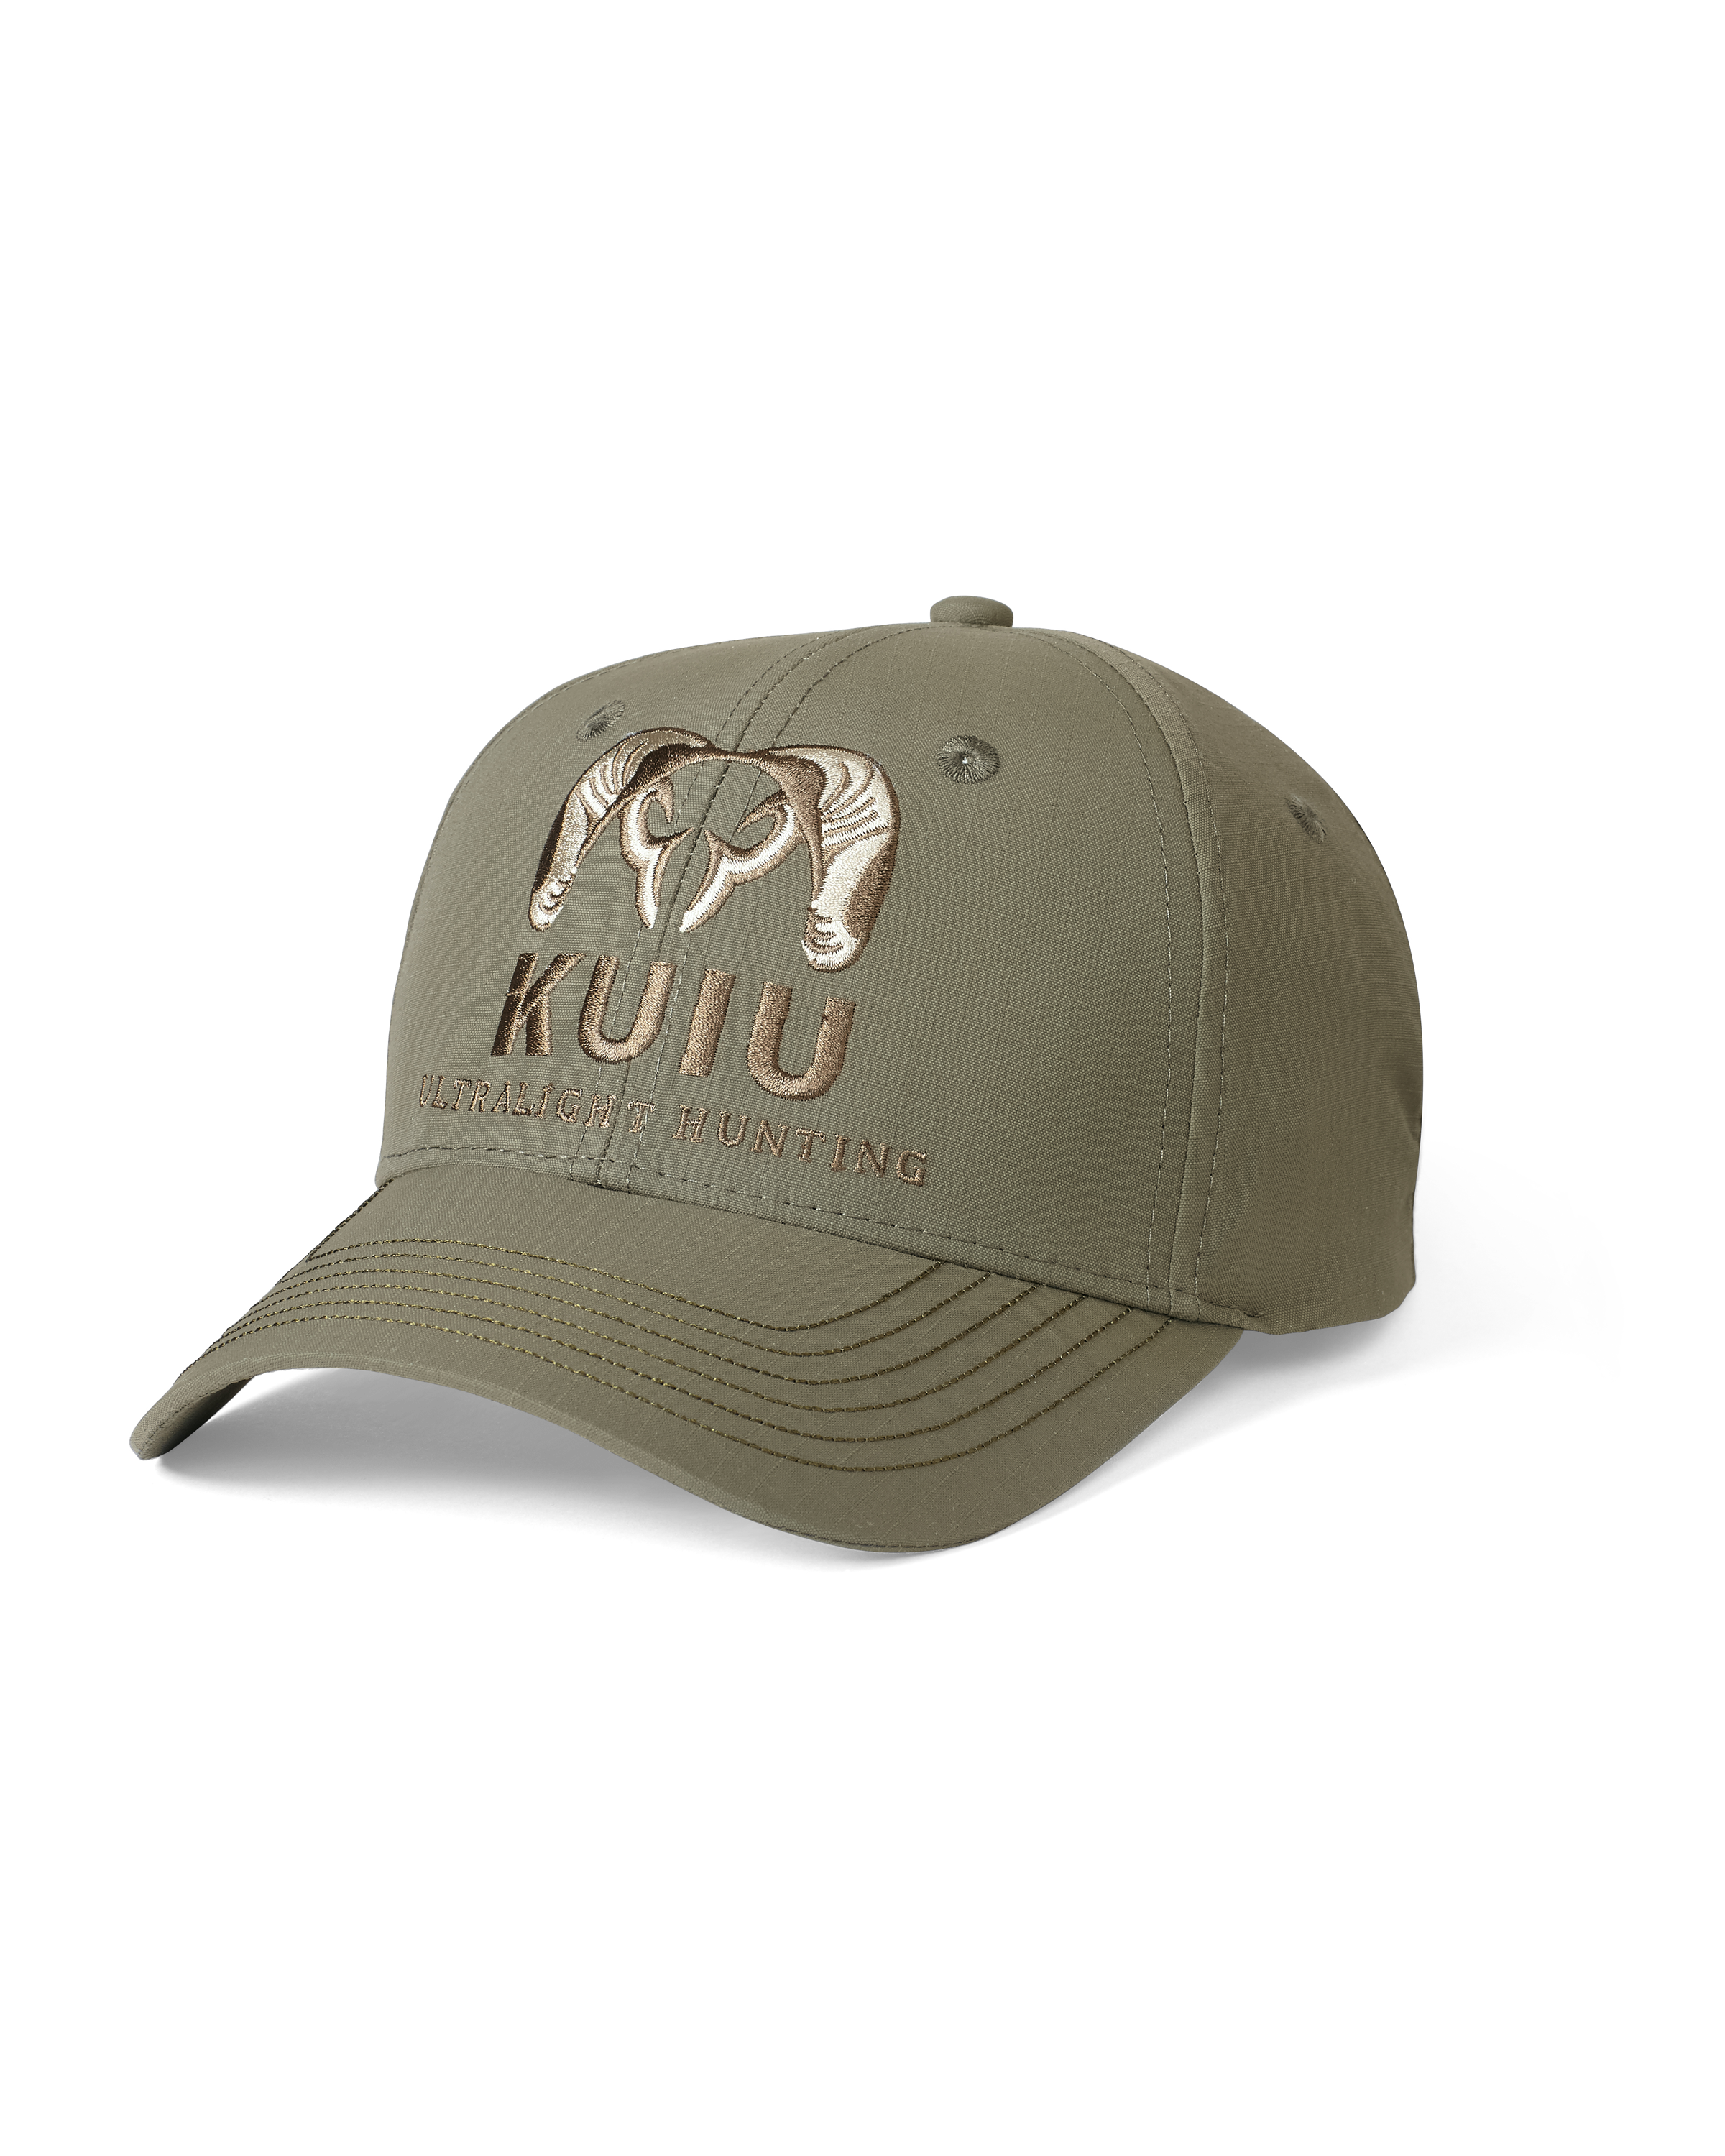 Hat Gear Deals Marked Down on Sale, Clearance & Discounted from